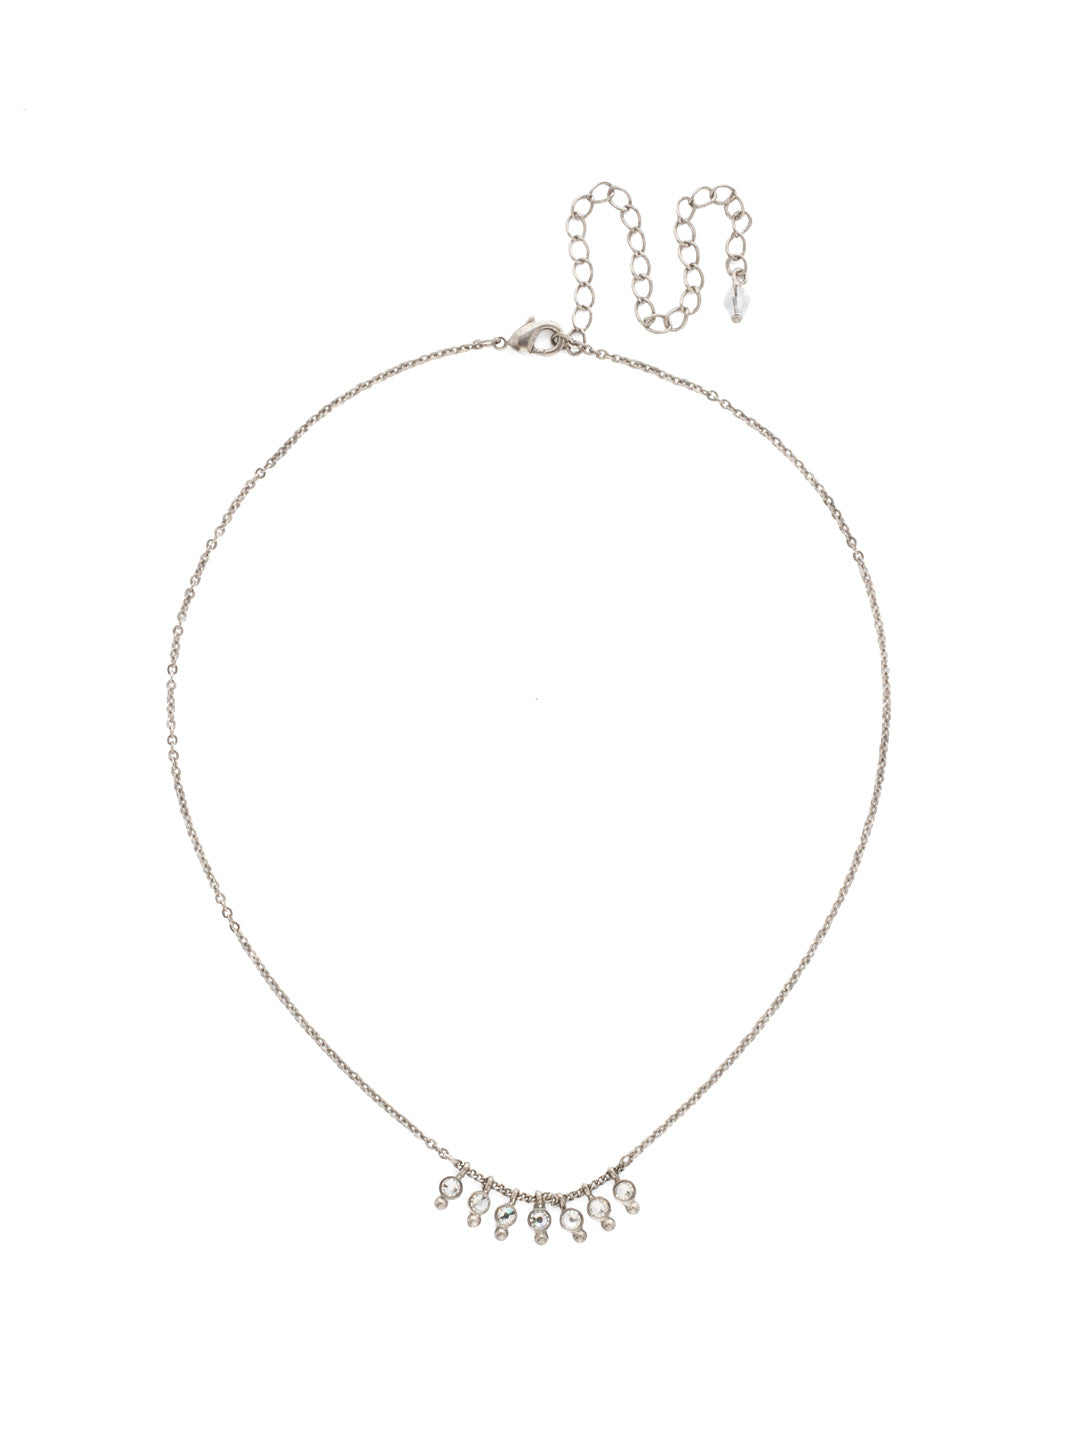 Delicate Dots Pendant Necklace - NDN115ASCRY - <p>Seven petite round cut crystals in ornamental metal settings adorn a thin chain in this simple, easy-to-layer necklace. From Sorrelli's Crystal collection in our Antique Silver-tone finish.</p>